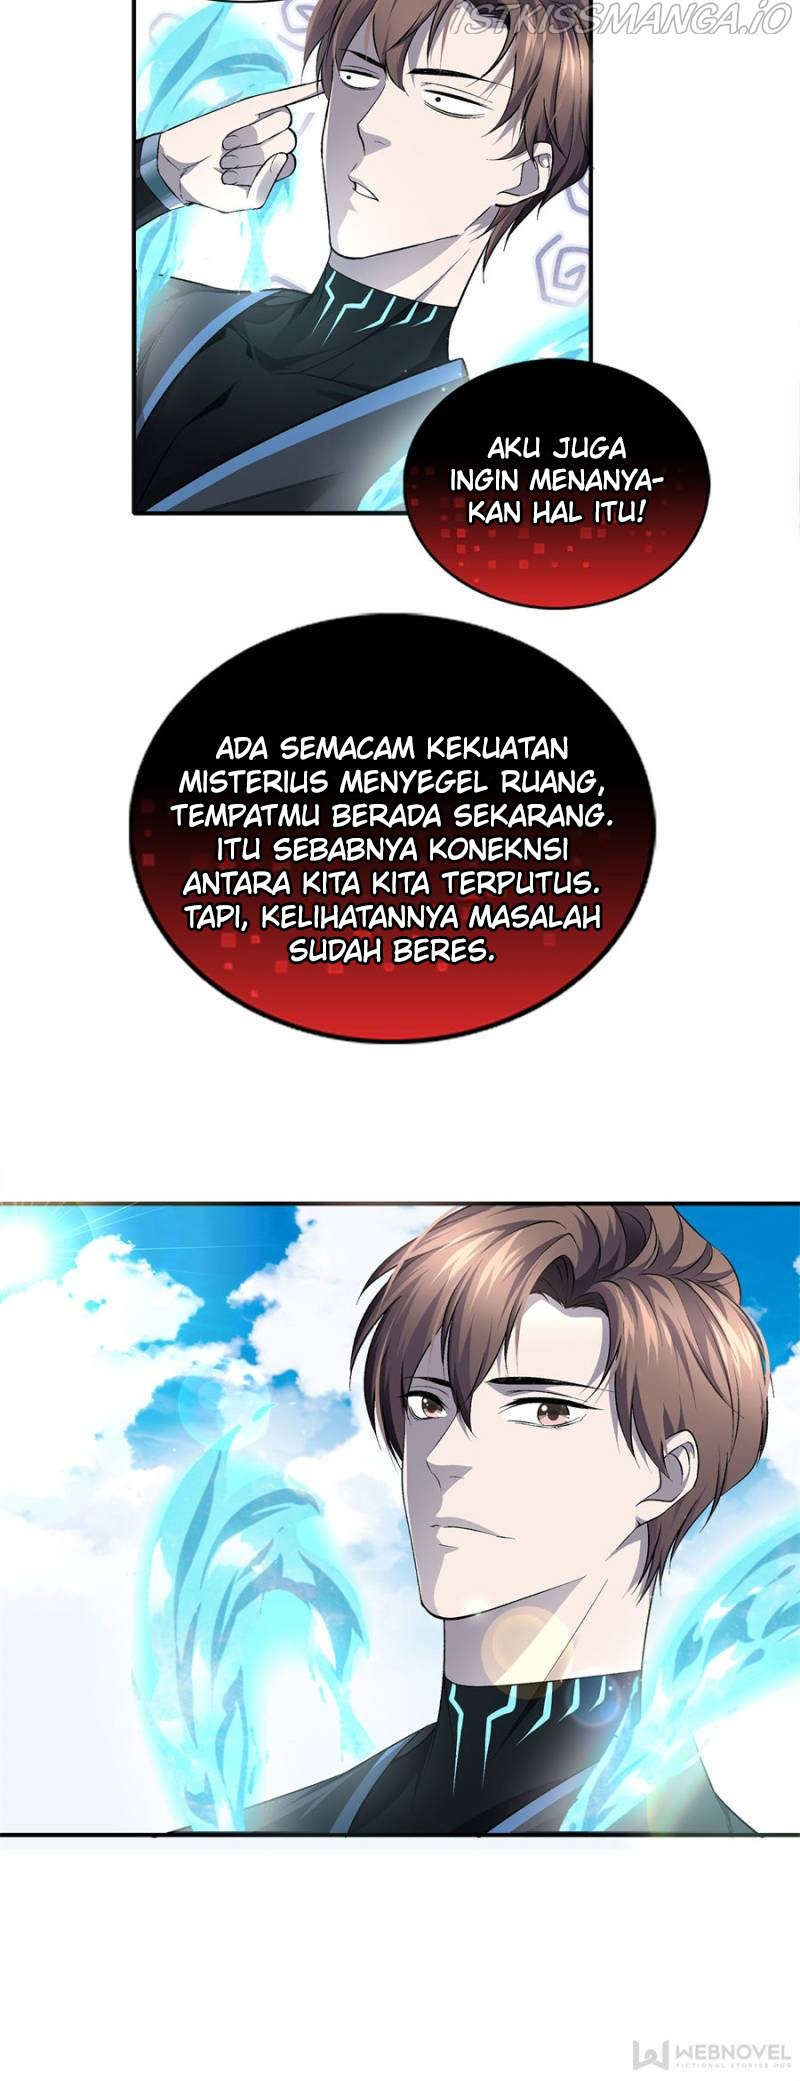 Strongest System Yan Luo Chapter 98